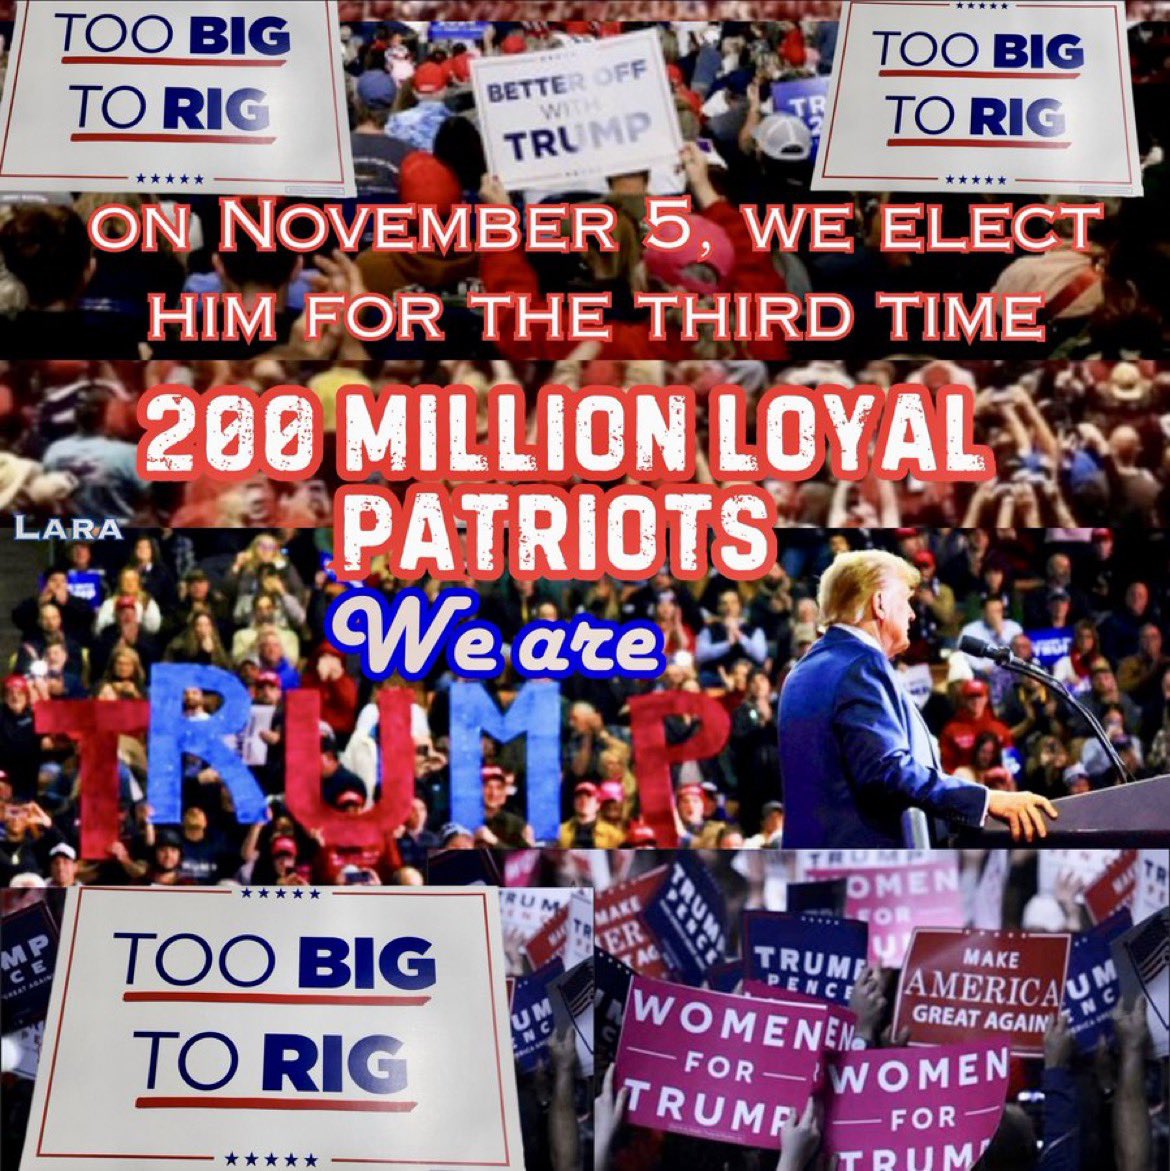 That’s right too big to rig. #Trump2024 #MAGA2024